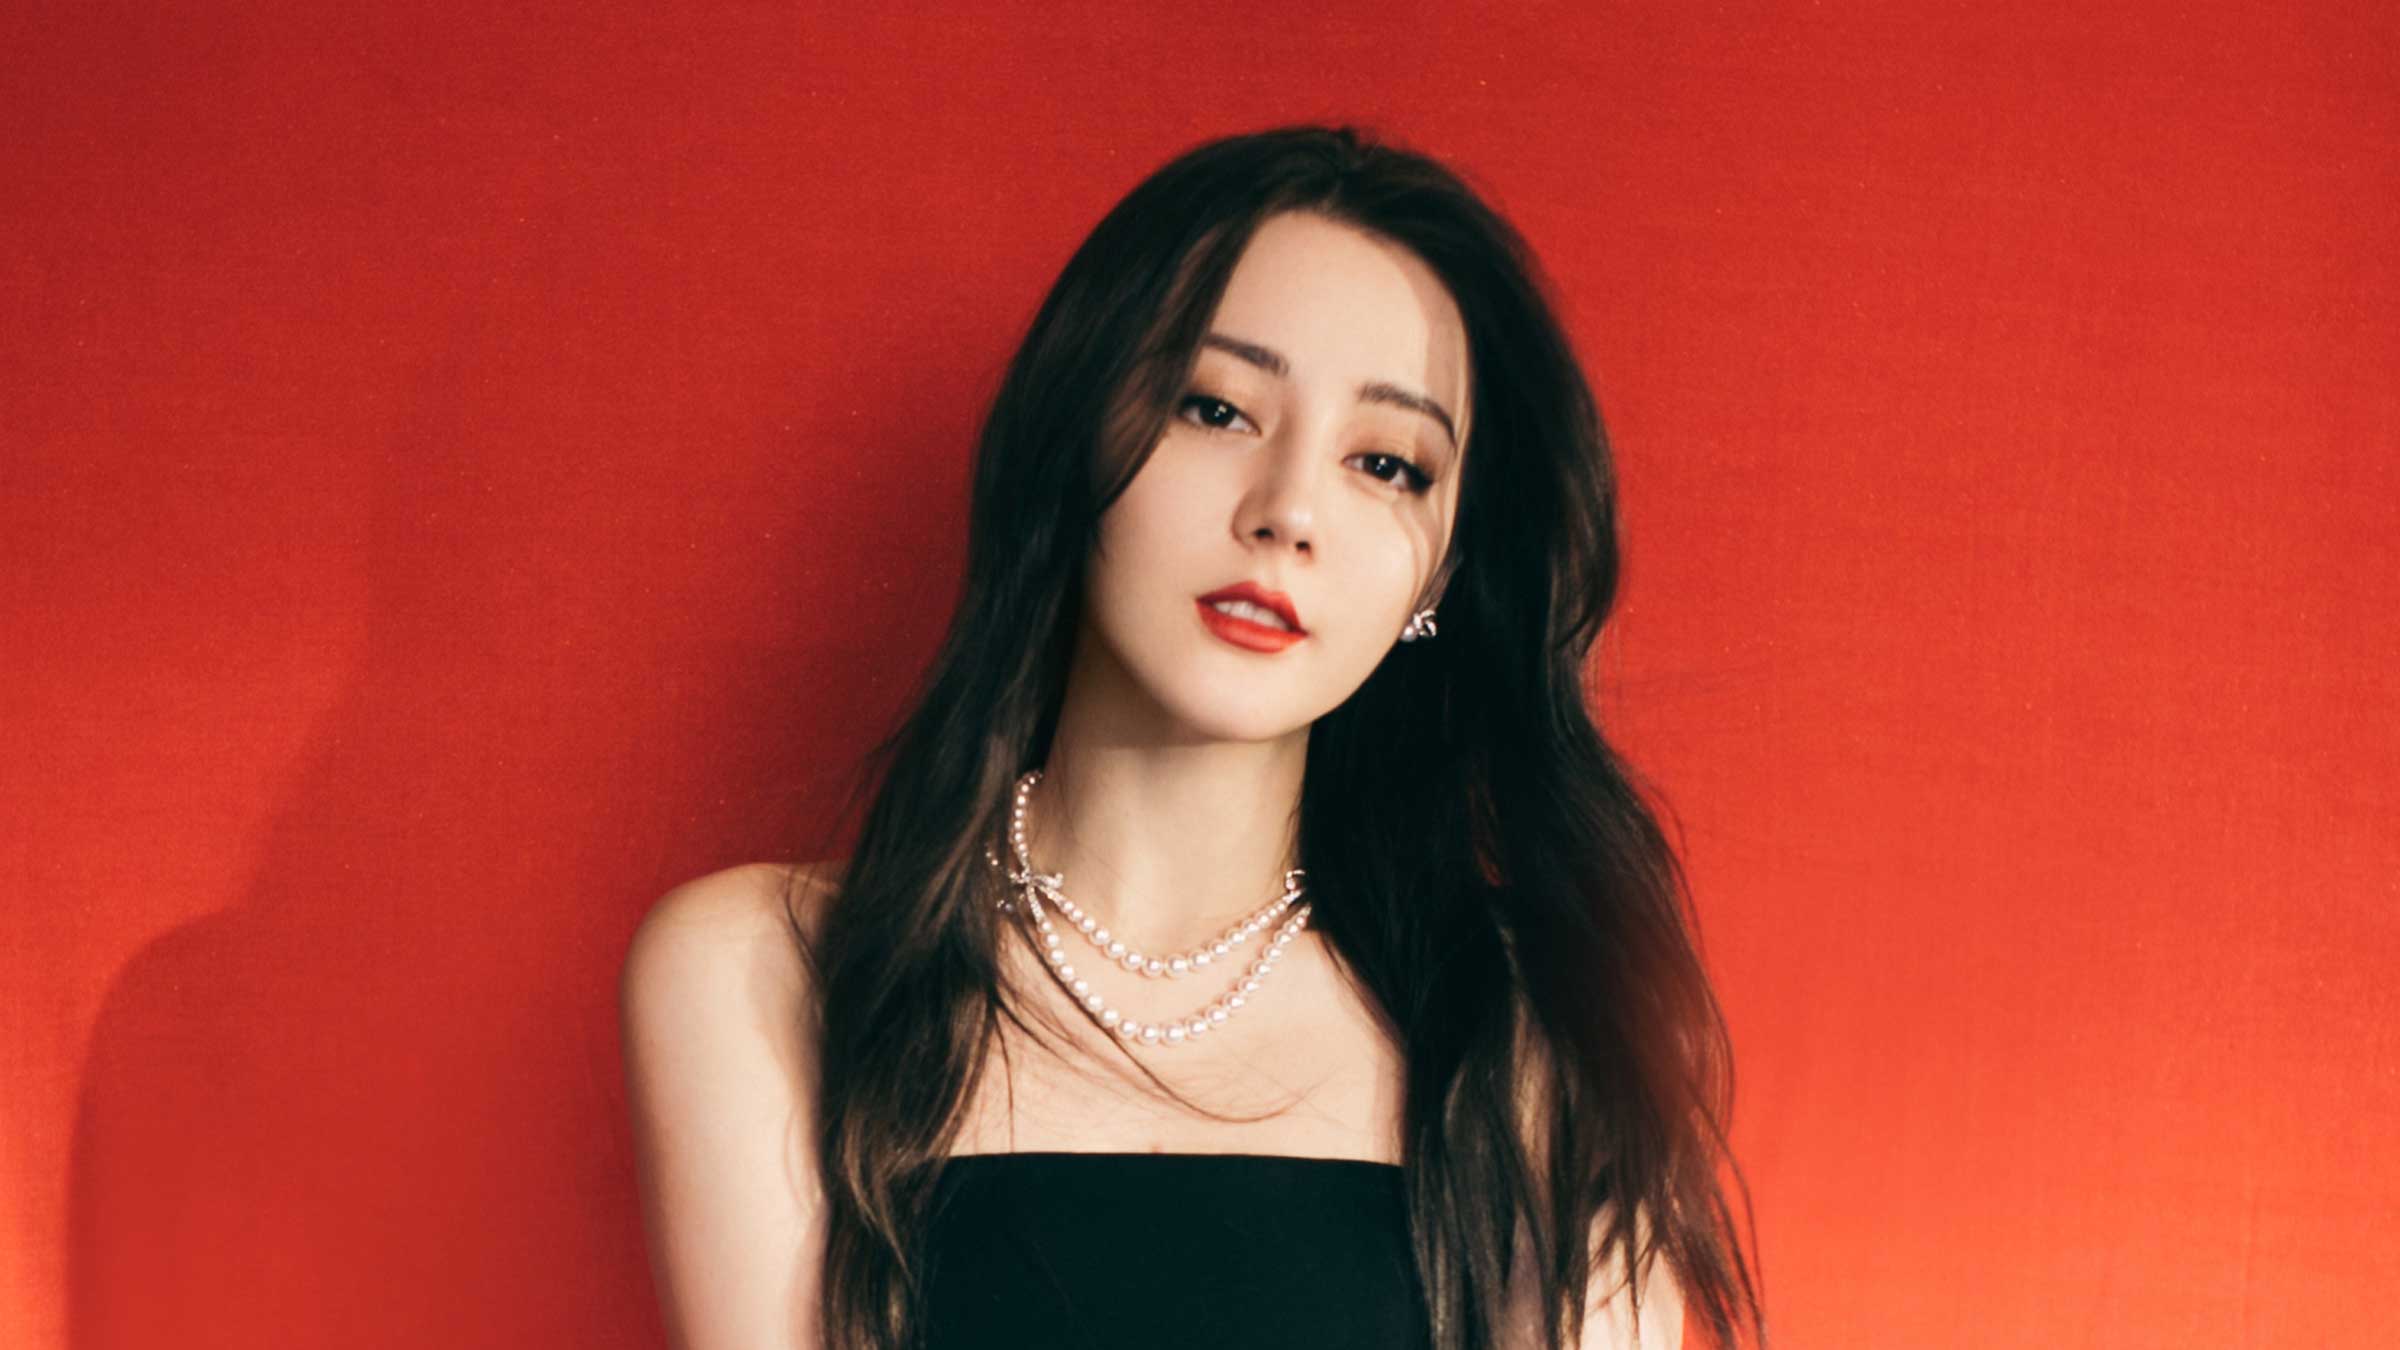 Rising C Drama Star Dilraba Dilmurat Why Shes An Actress To Watch